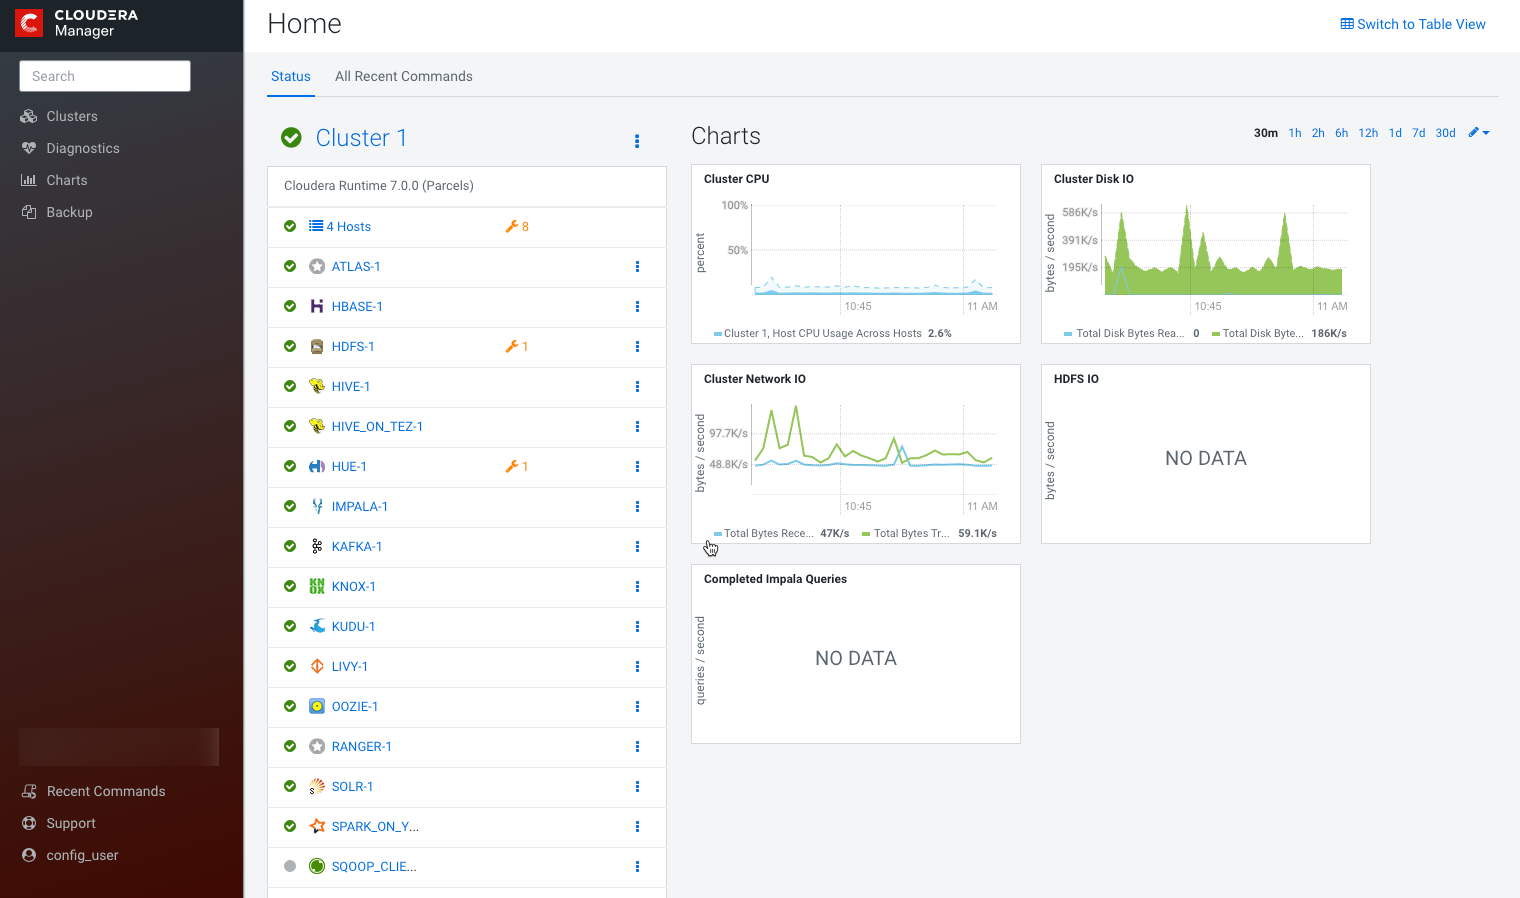 Cloudera Manager Admin Console Home Page